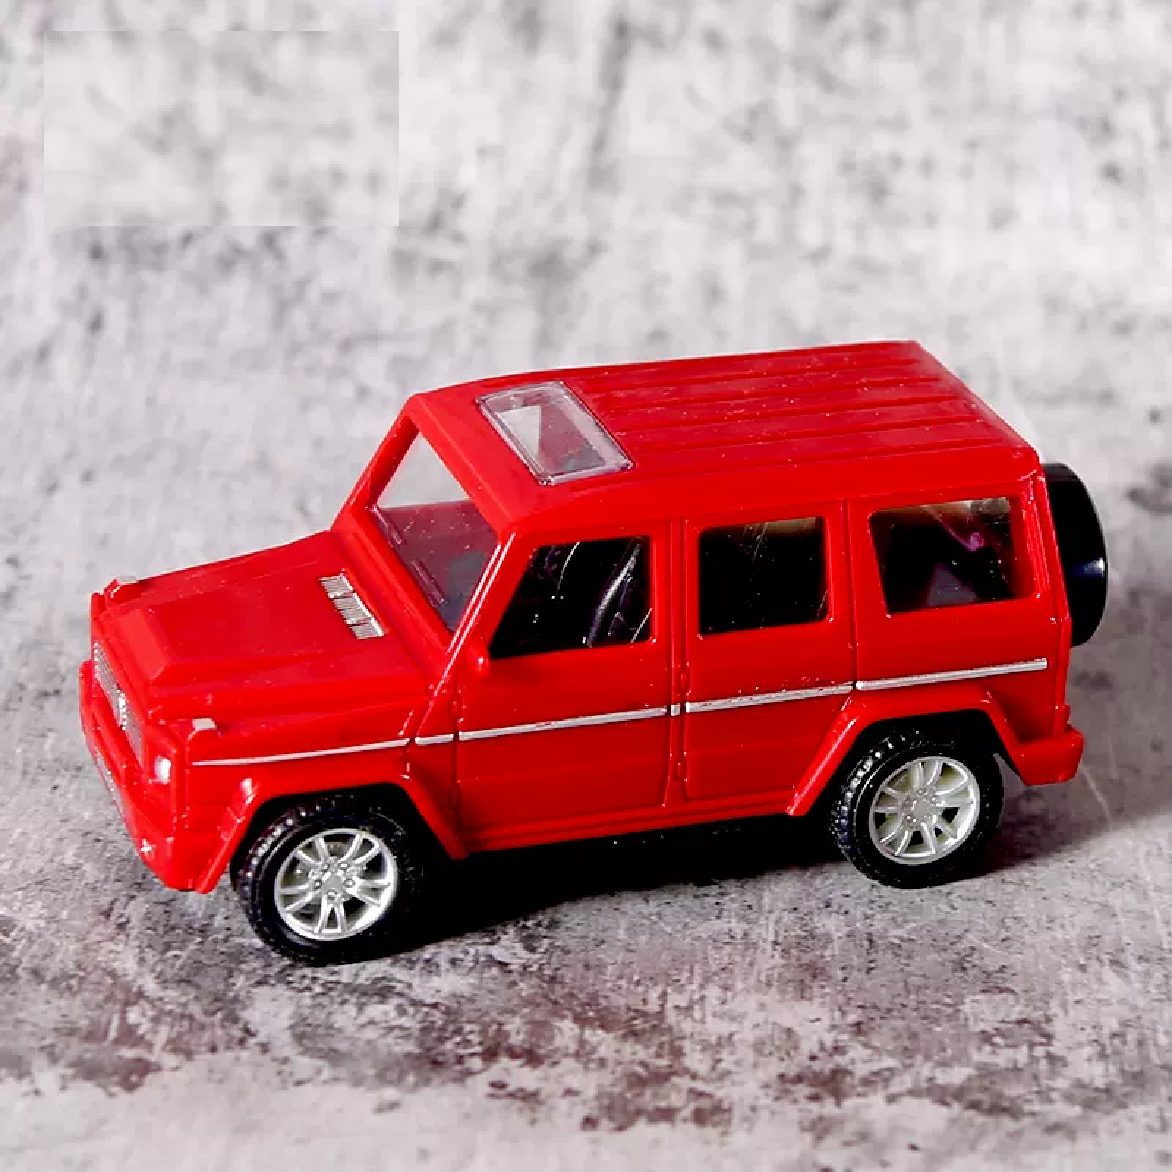 Cake Topper, Cake Decorations-  '4 x 4' off road vehicle - red - Rampant Coffee Company